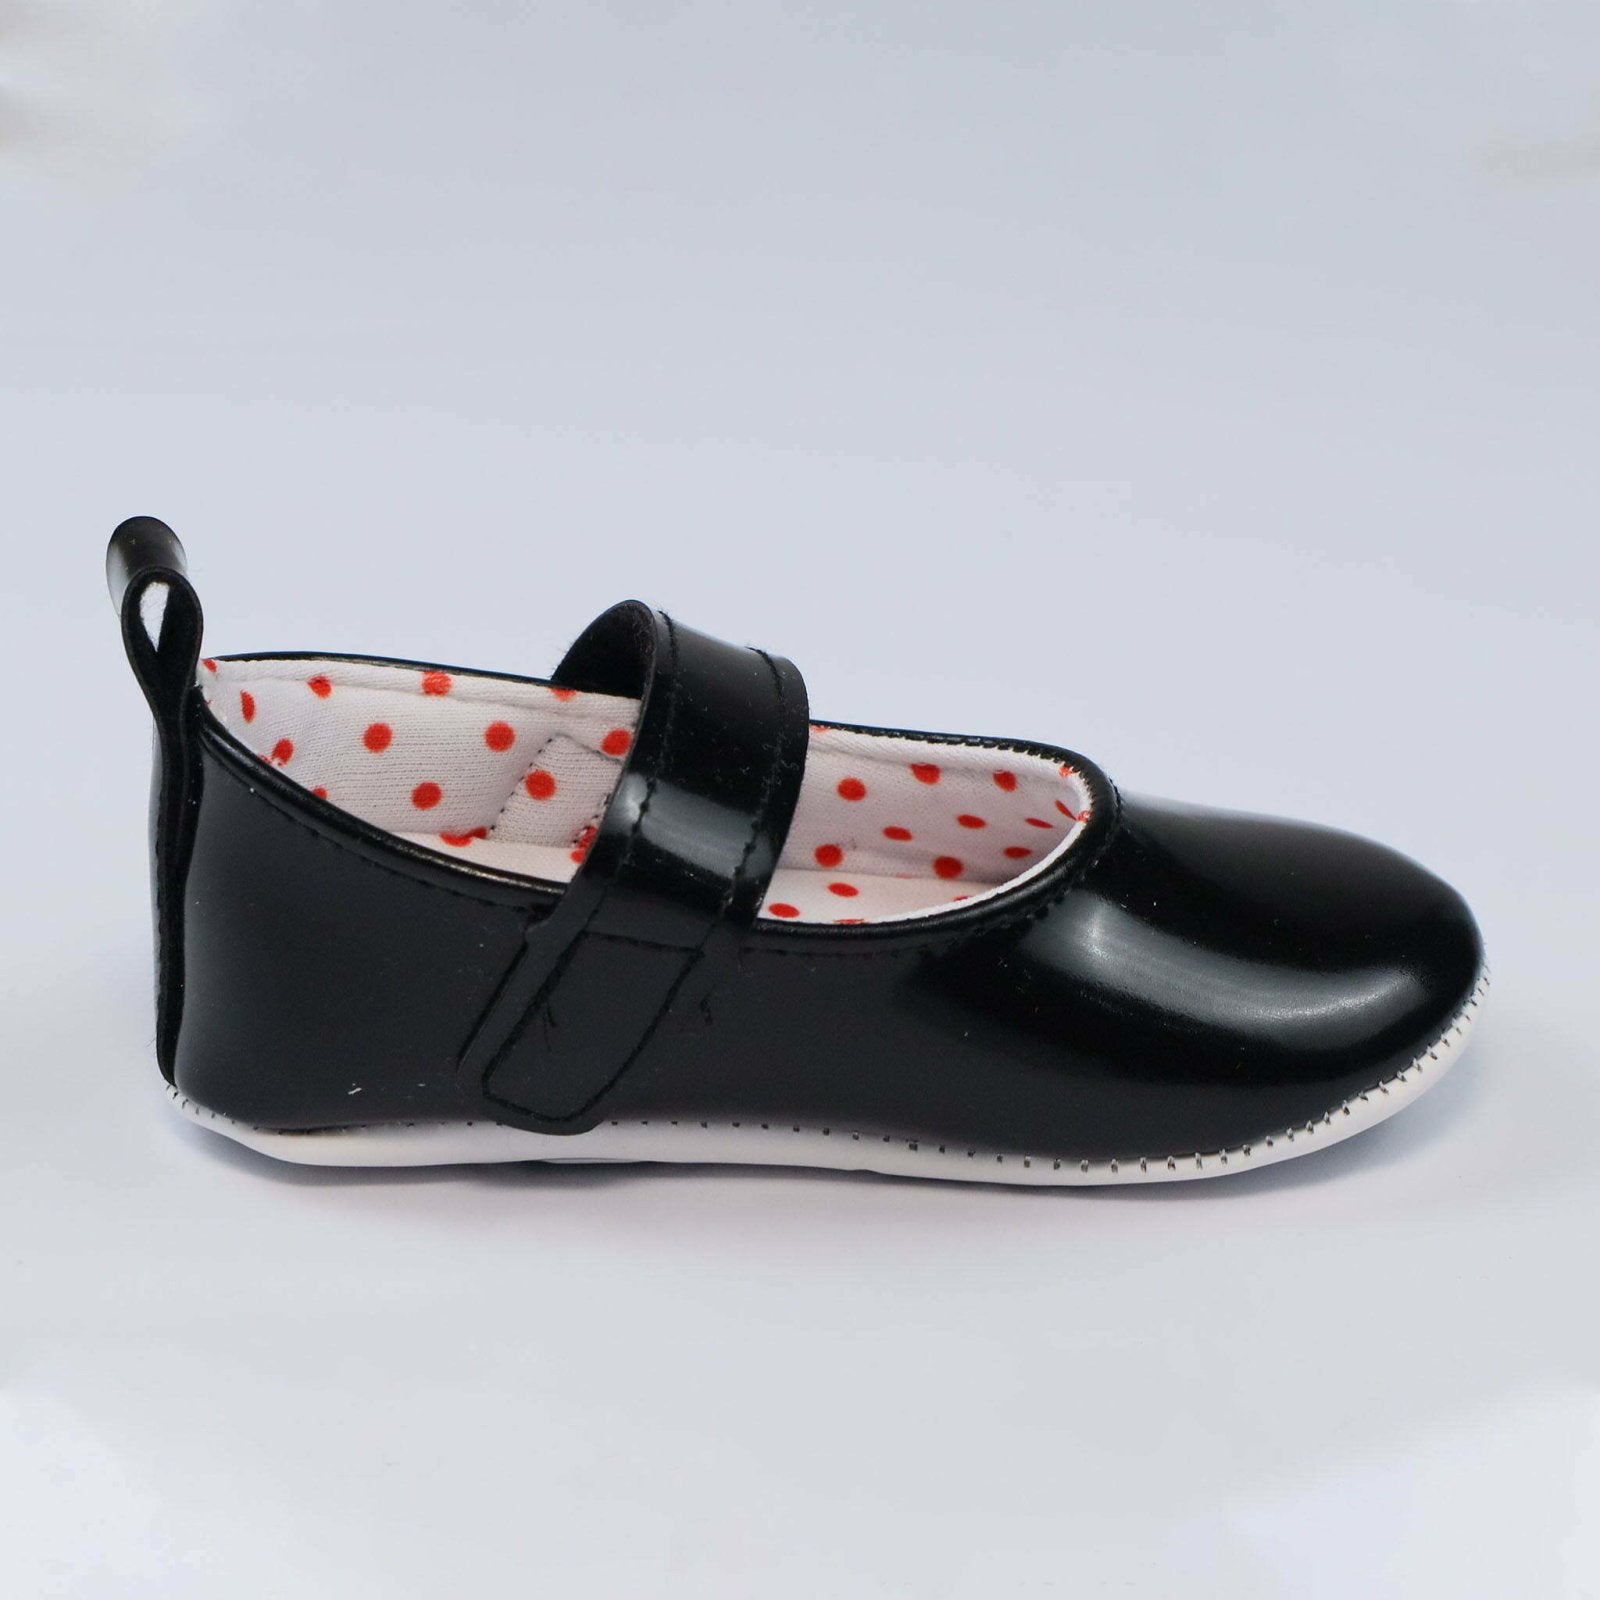 Baby Shoes Black Color by Baby Pattini